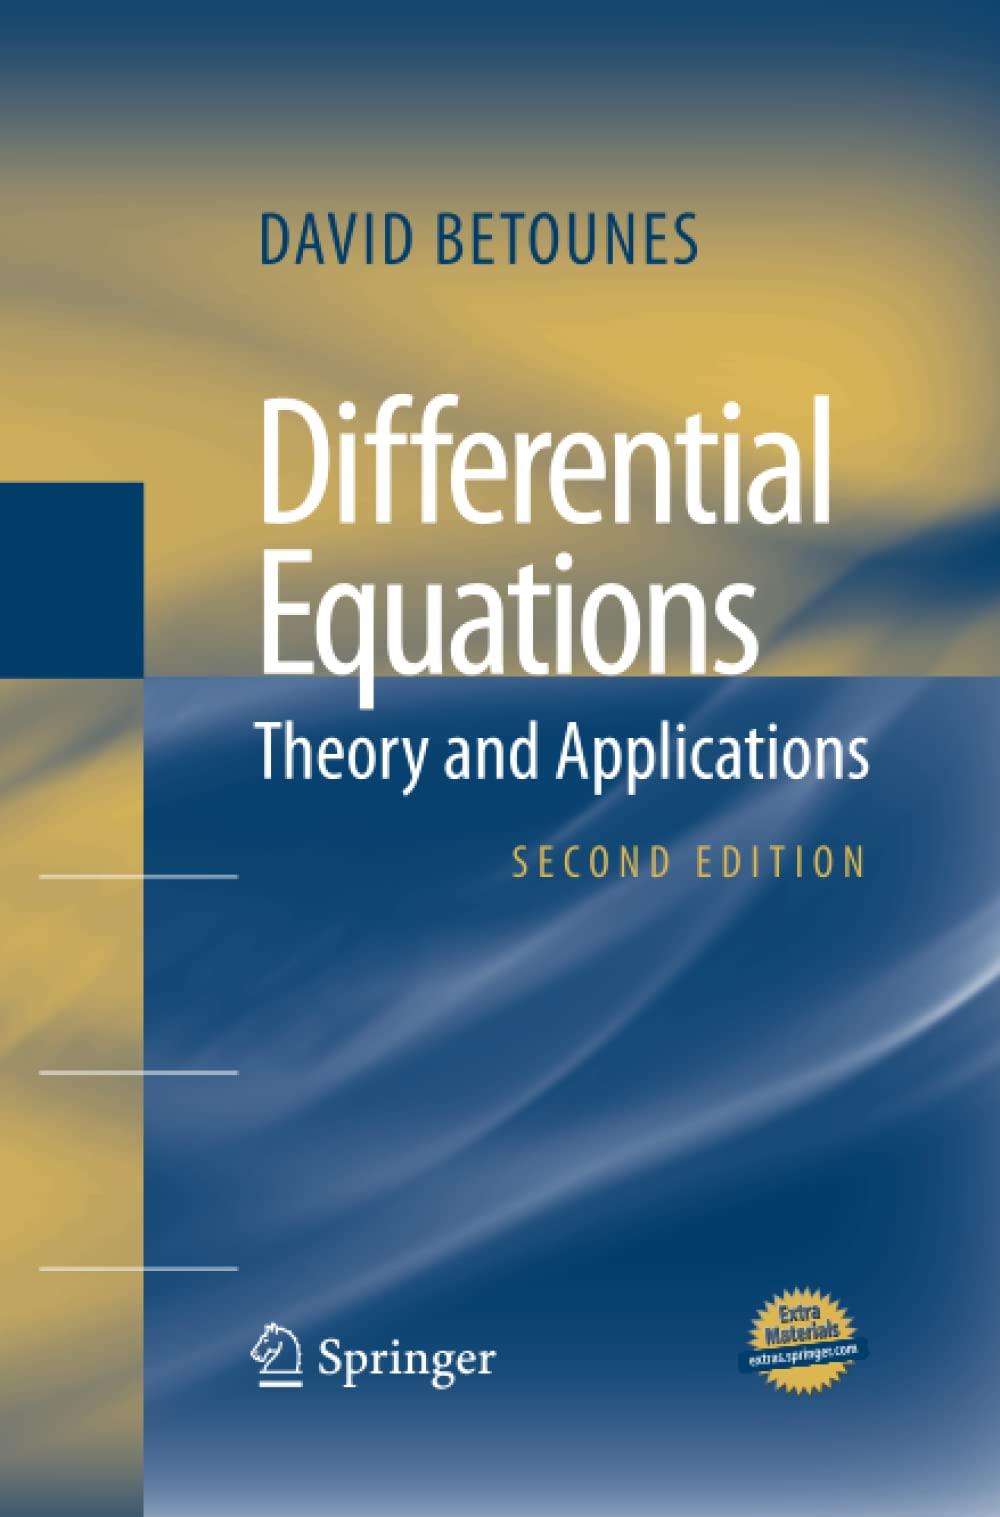 differential equations theory and applications 2nd edition david betounes 1489982655, 9781489982650